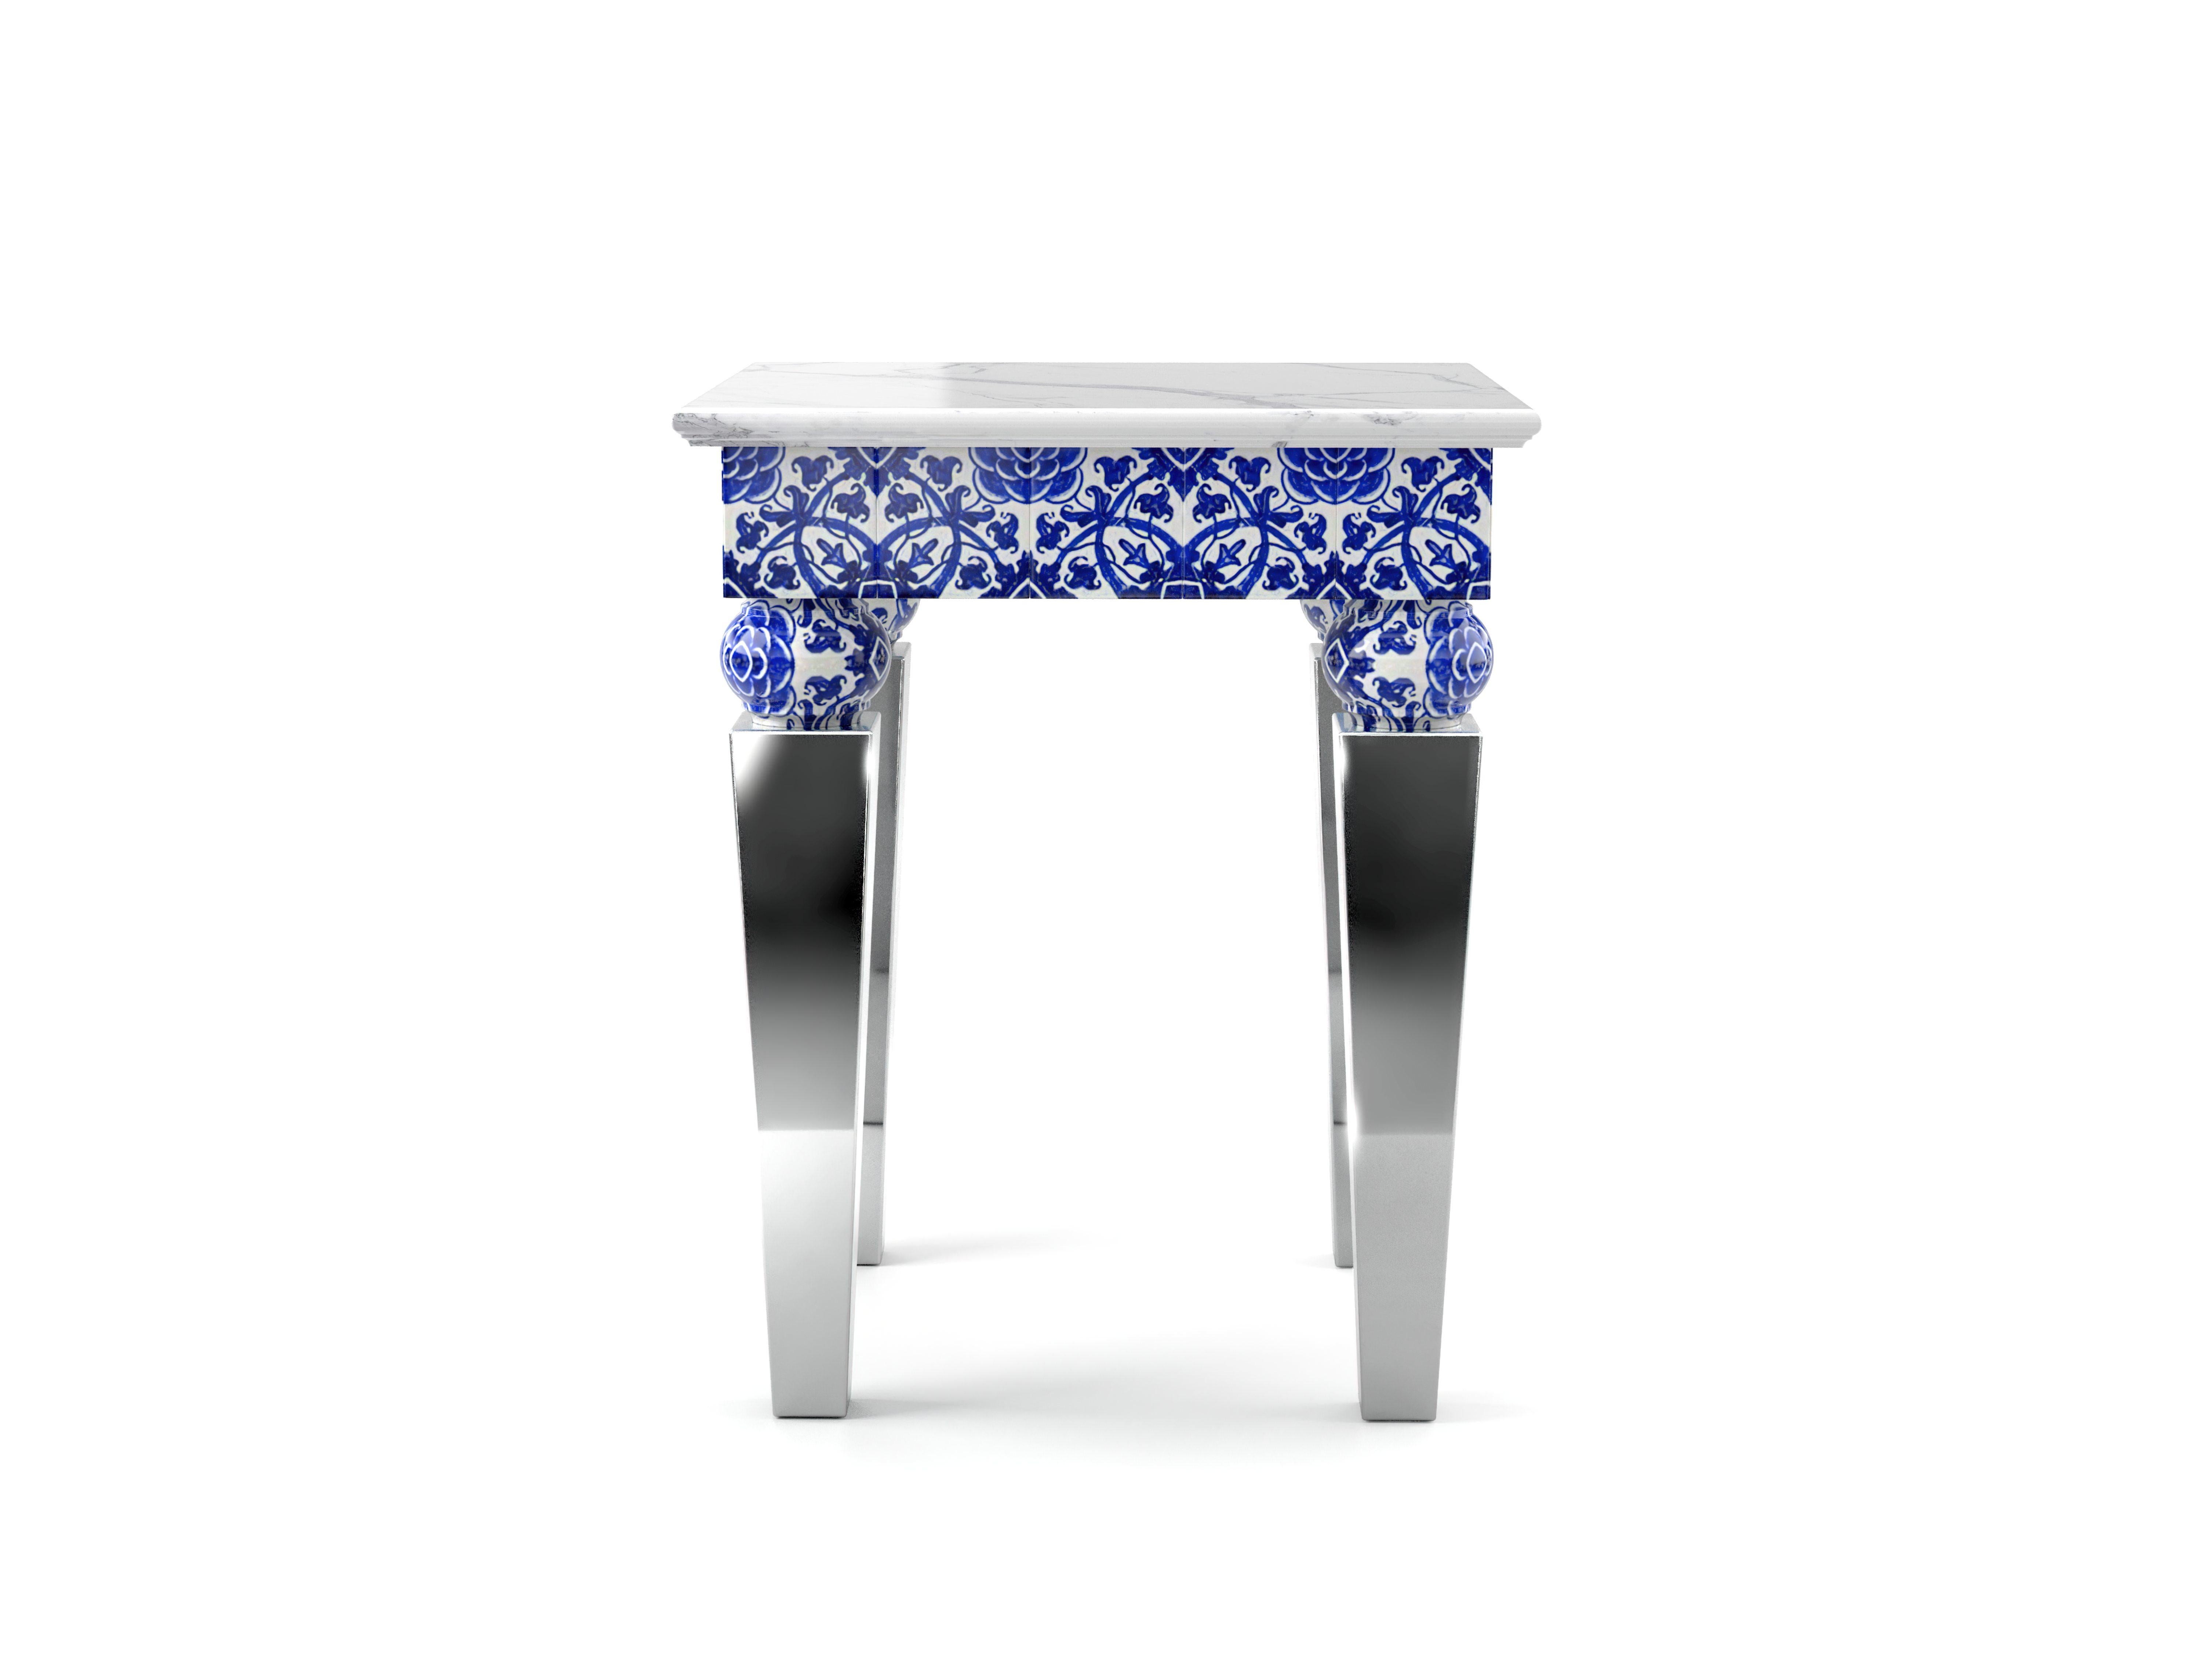 Contemporary Two Side Tables, White Marble, Mirror Steel, Blue Majolica Tiles, Also Outdoor For Sale